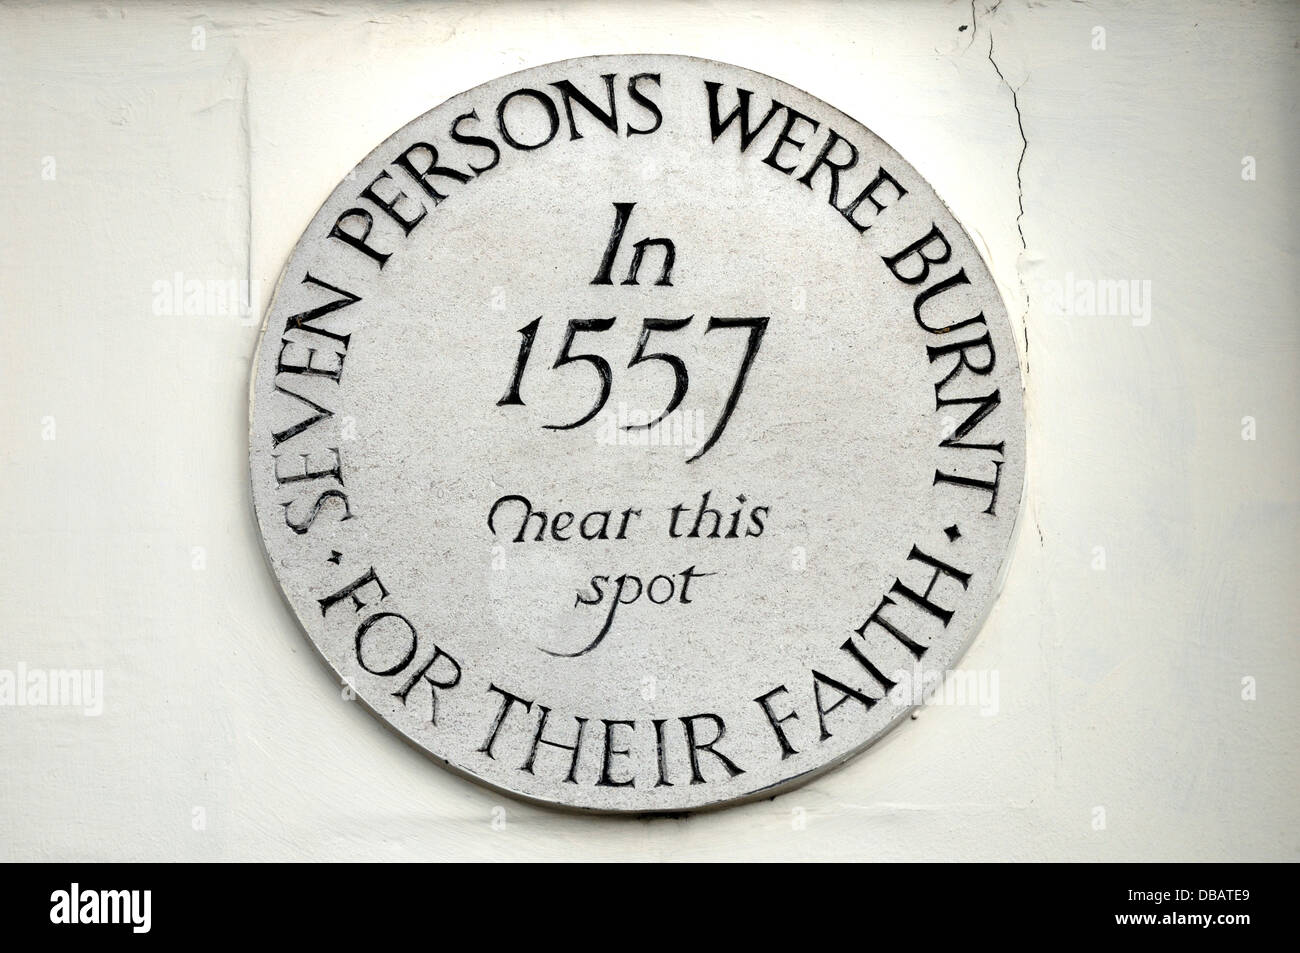 Maidstone, Kent, England. Plaque on the wall of Drakes pub commemorating the burning of seven martyrs in 1557 (see description) Stock Photo